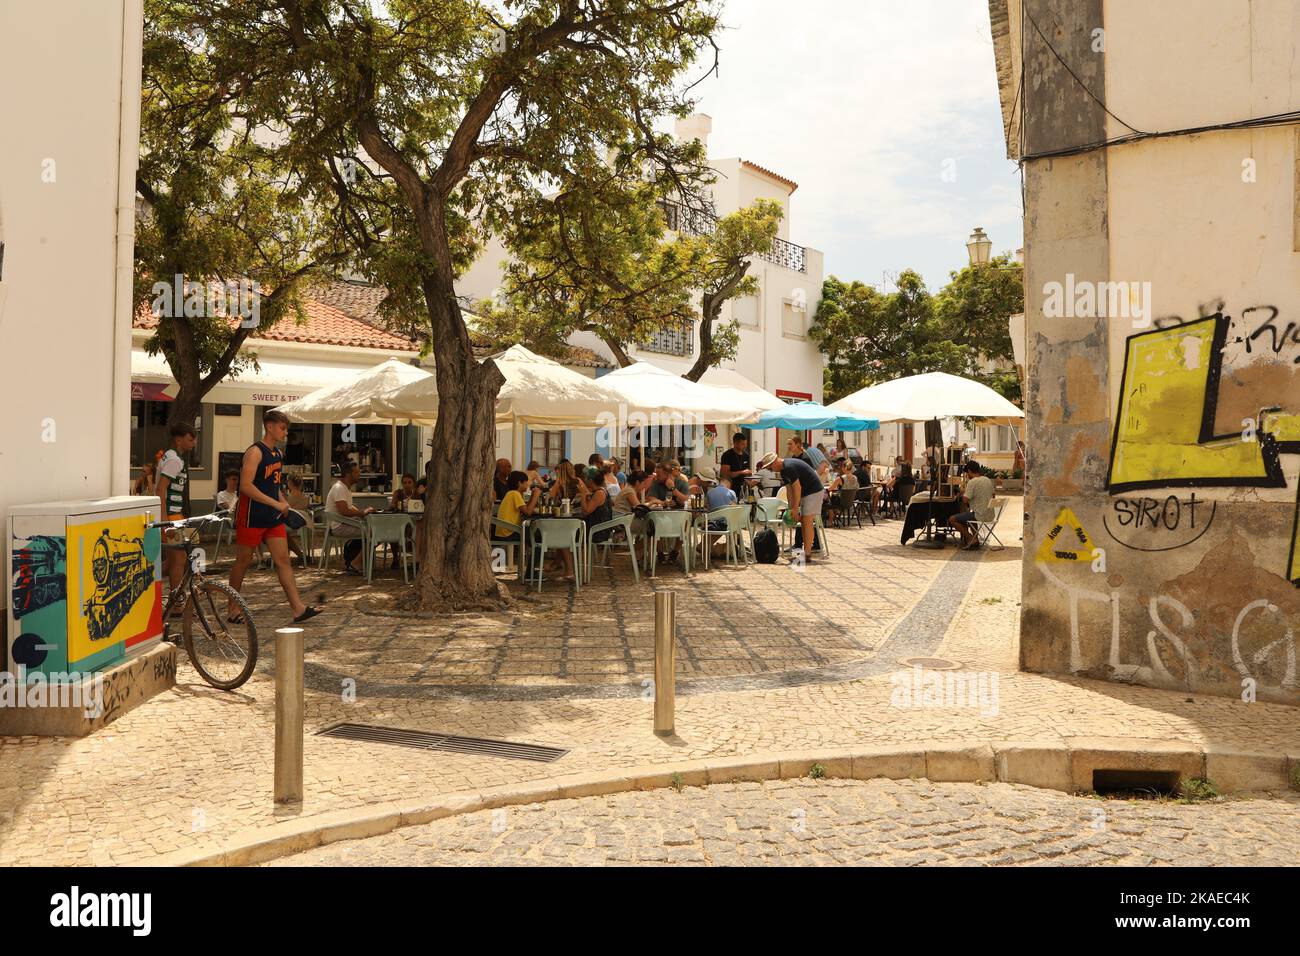 People sitting under umbrellas outside a cafe, Lagos, Algarve, Portugal Stock Photo